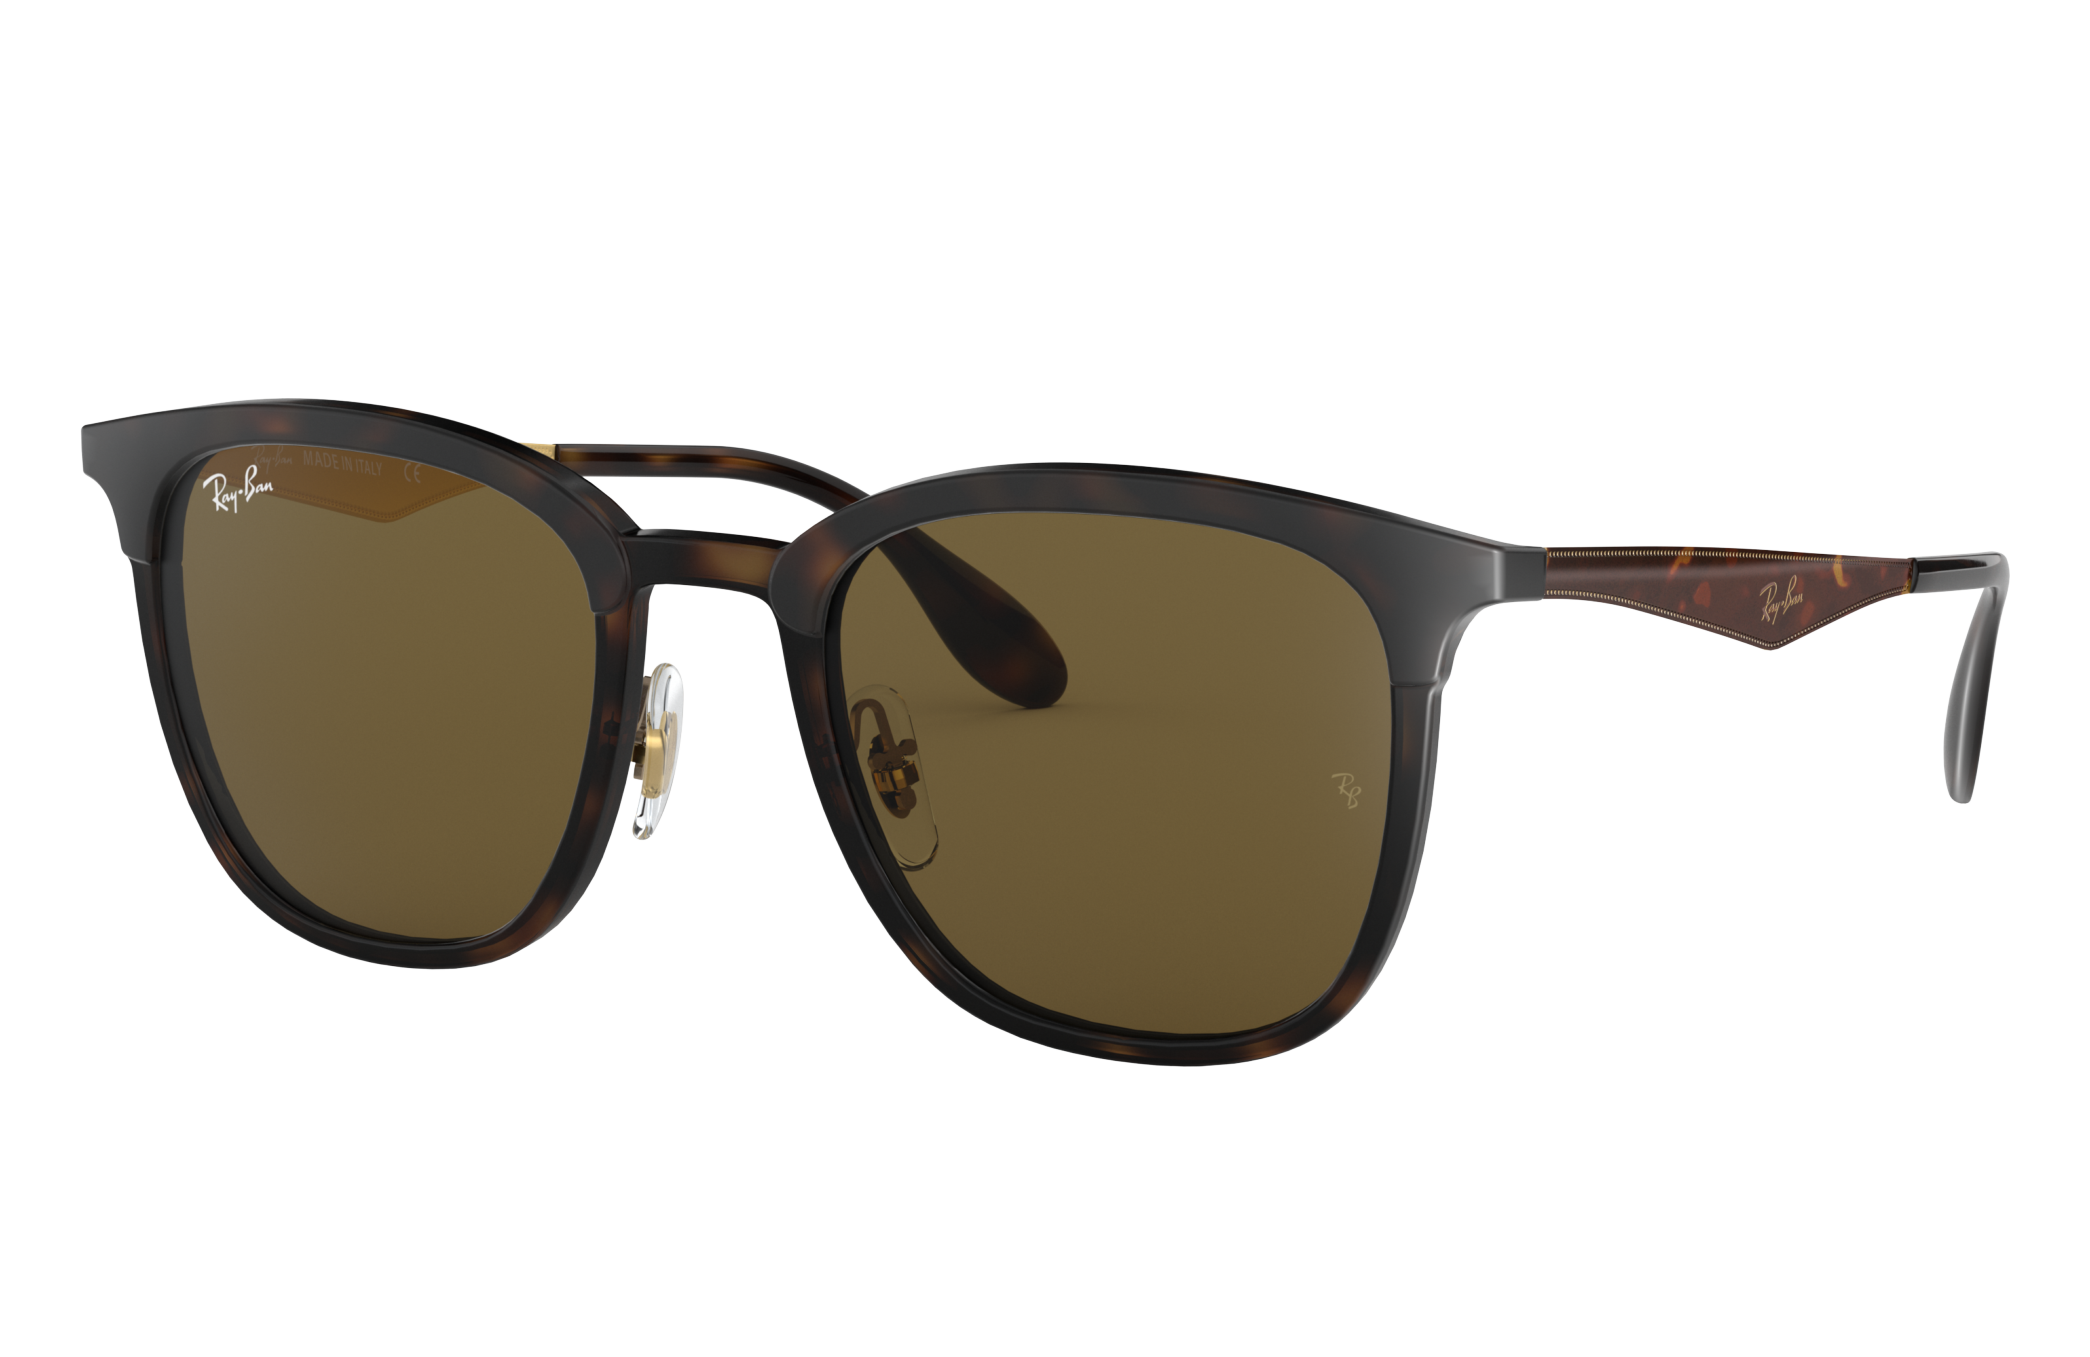 Rb4278 Sunglasses in Tortoise and Brown - RB4278 | Ray-Ban® US